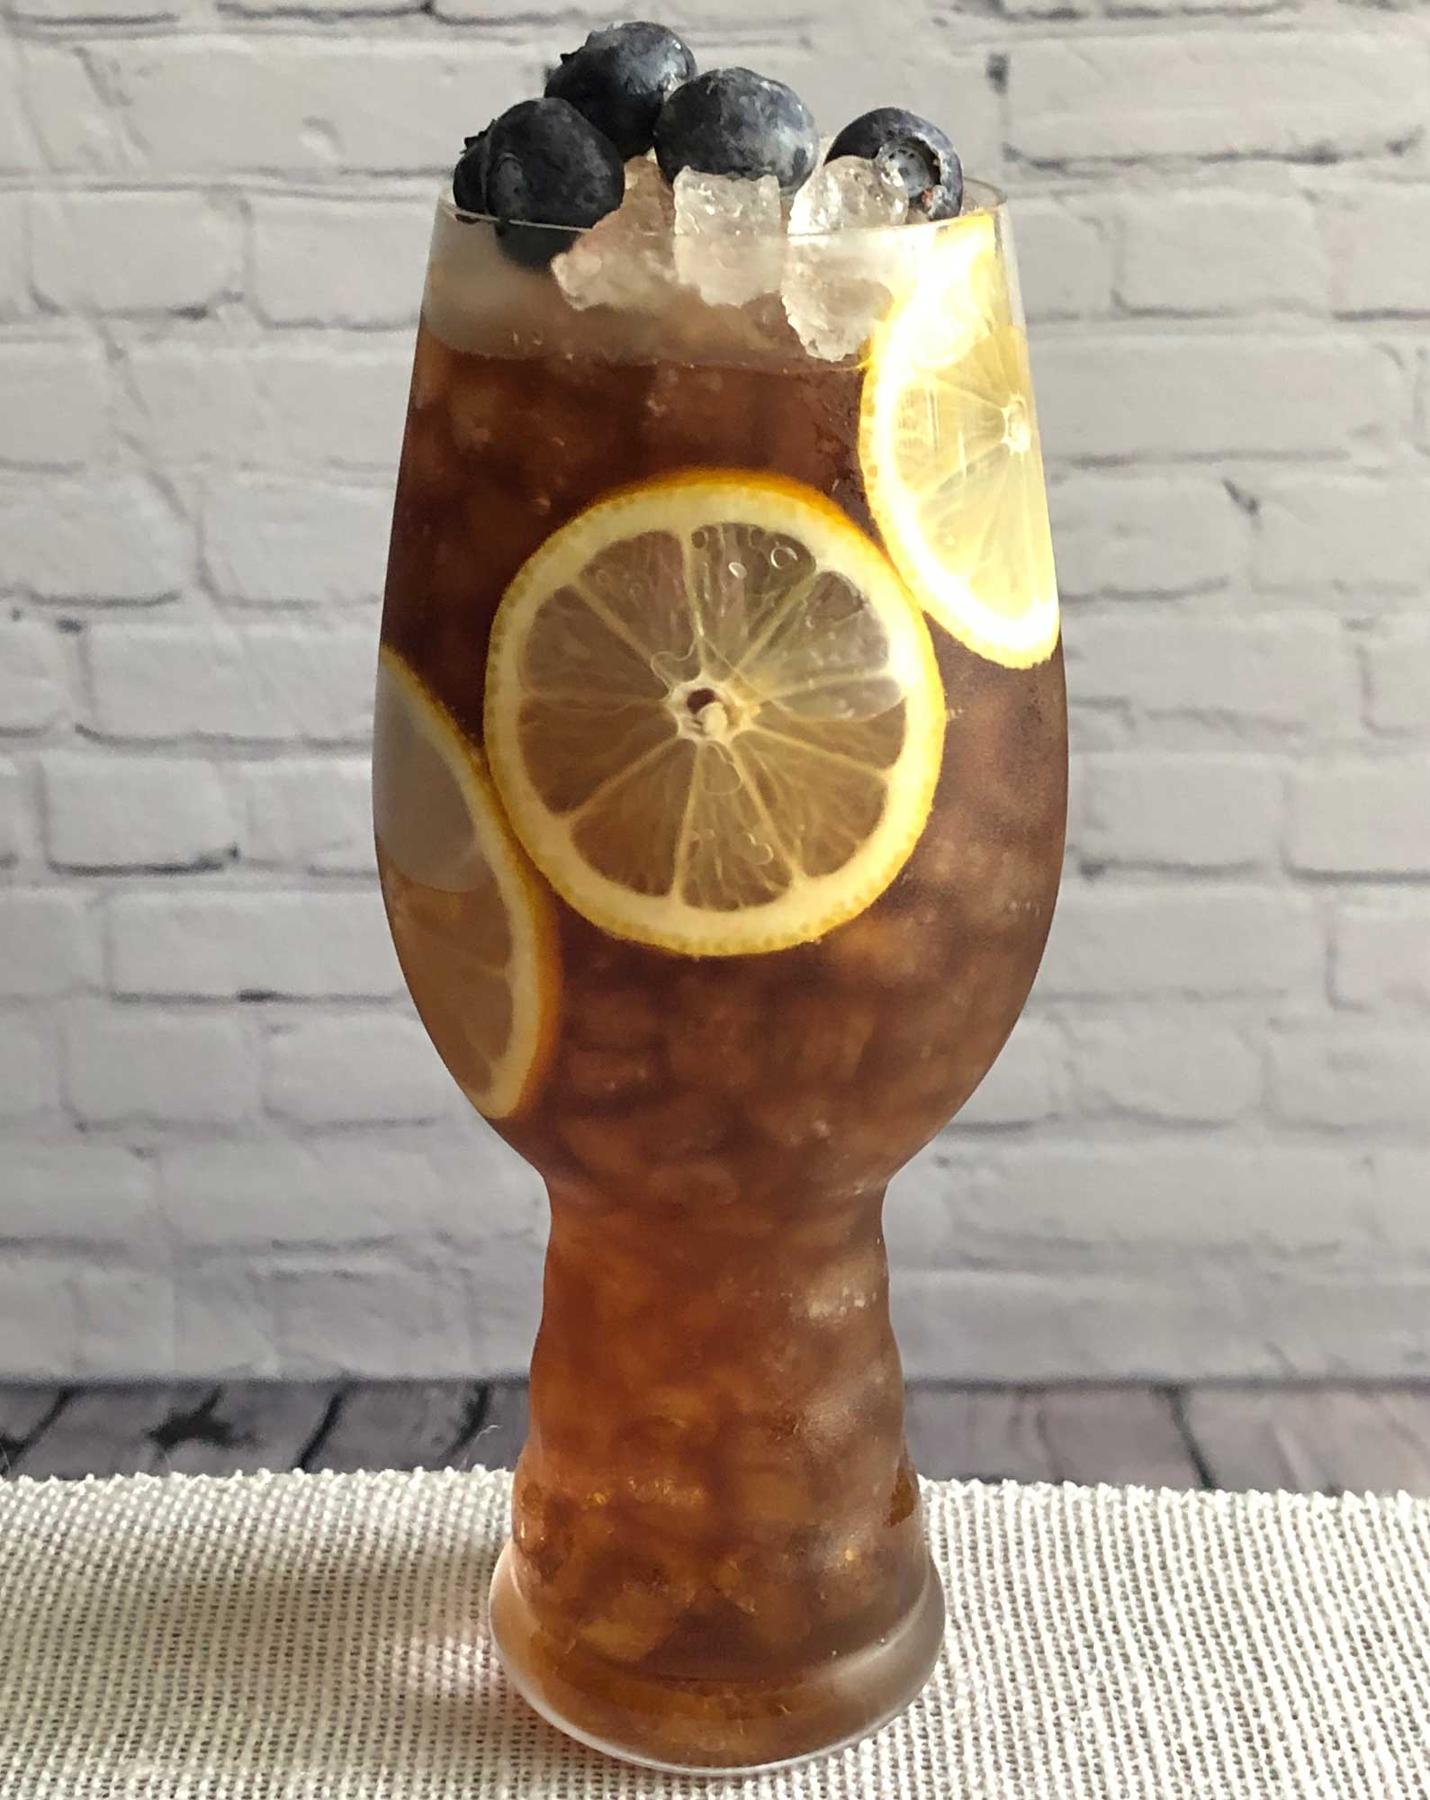 An example of the Pasubio & Coke, the mixed drink (drink) featuring Coca Cola, Pasubio Vino Amaro, and squeeze of lemon; photo by Lee Edwards